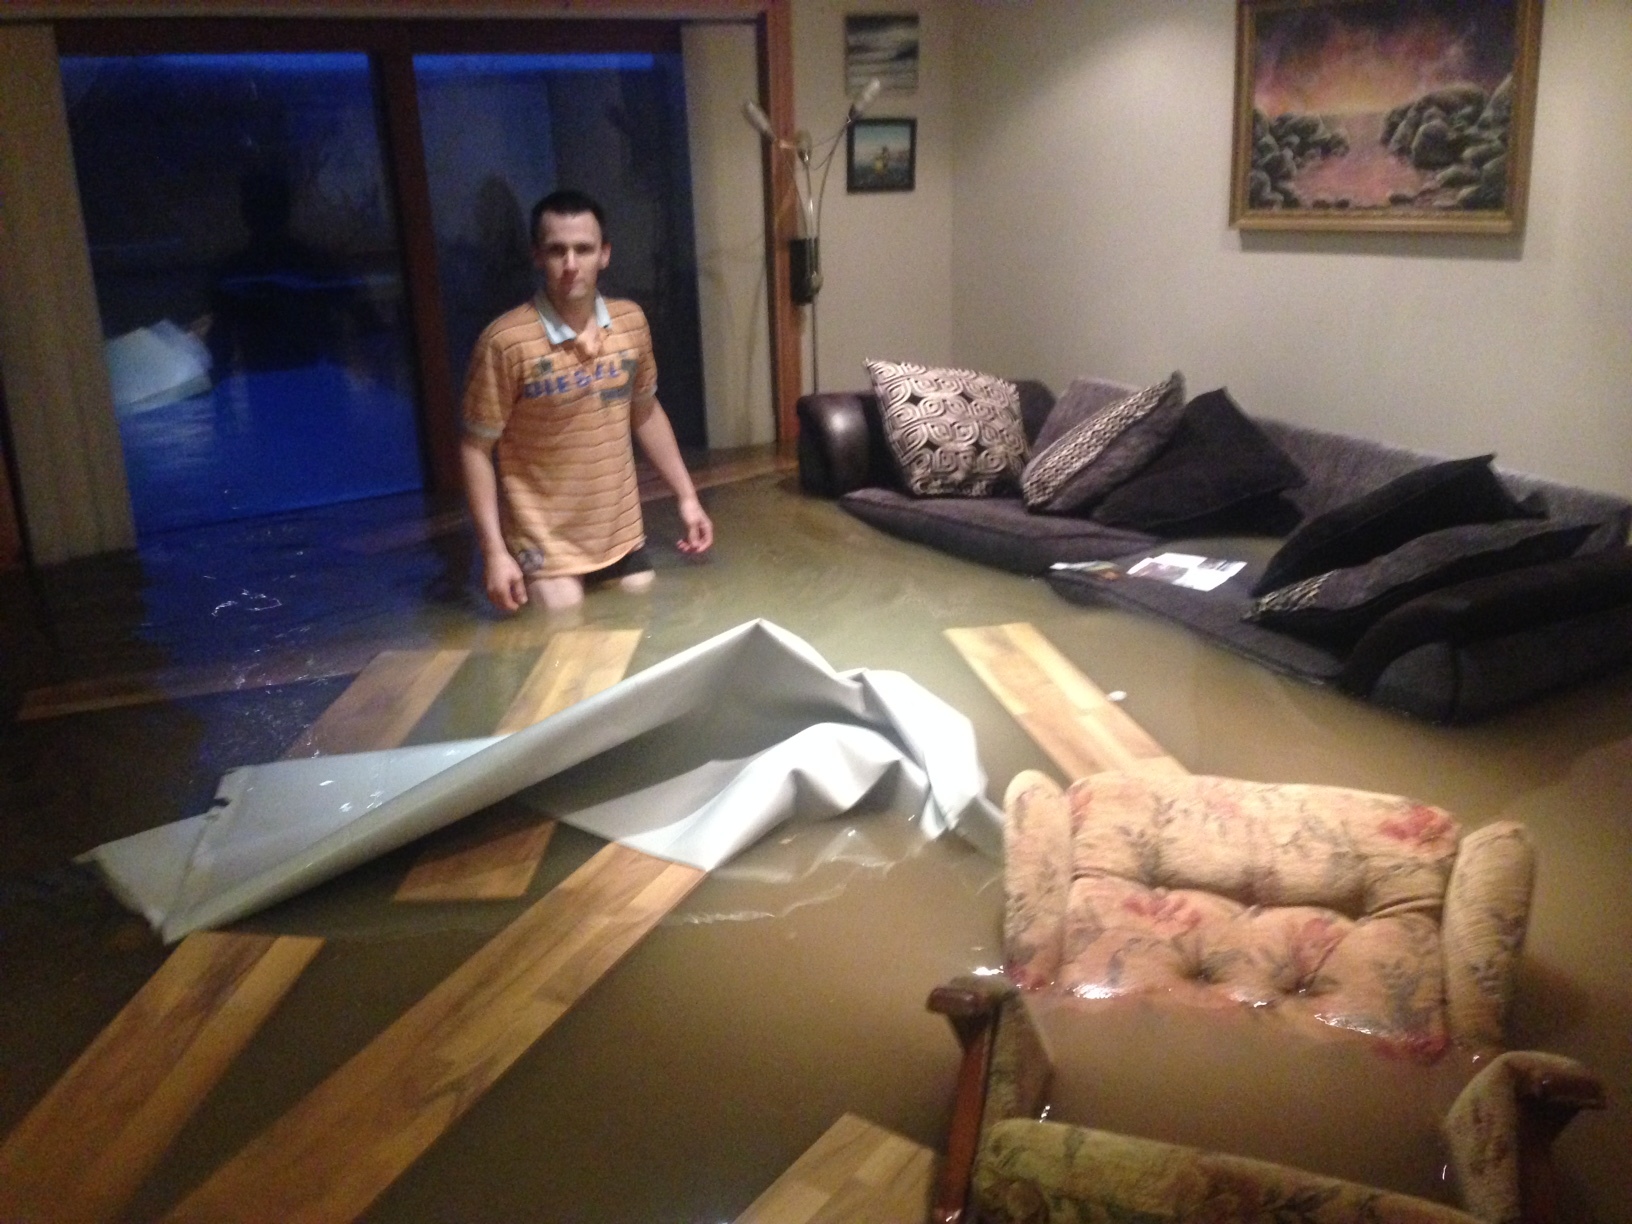 Shane Stephen dived into the floodwaters to try to rescue Mr Ronsberg's belongings